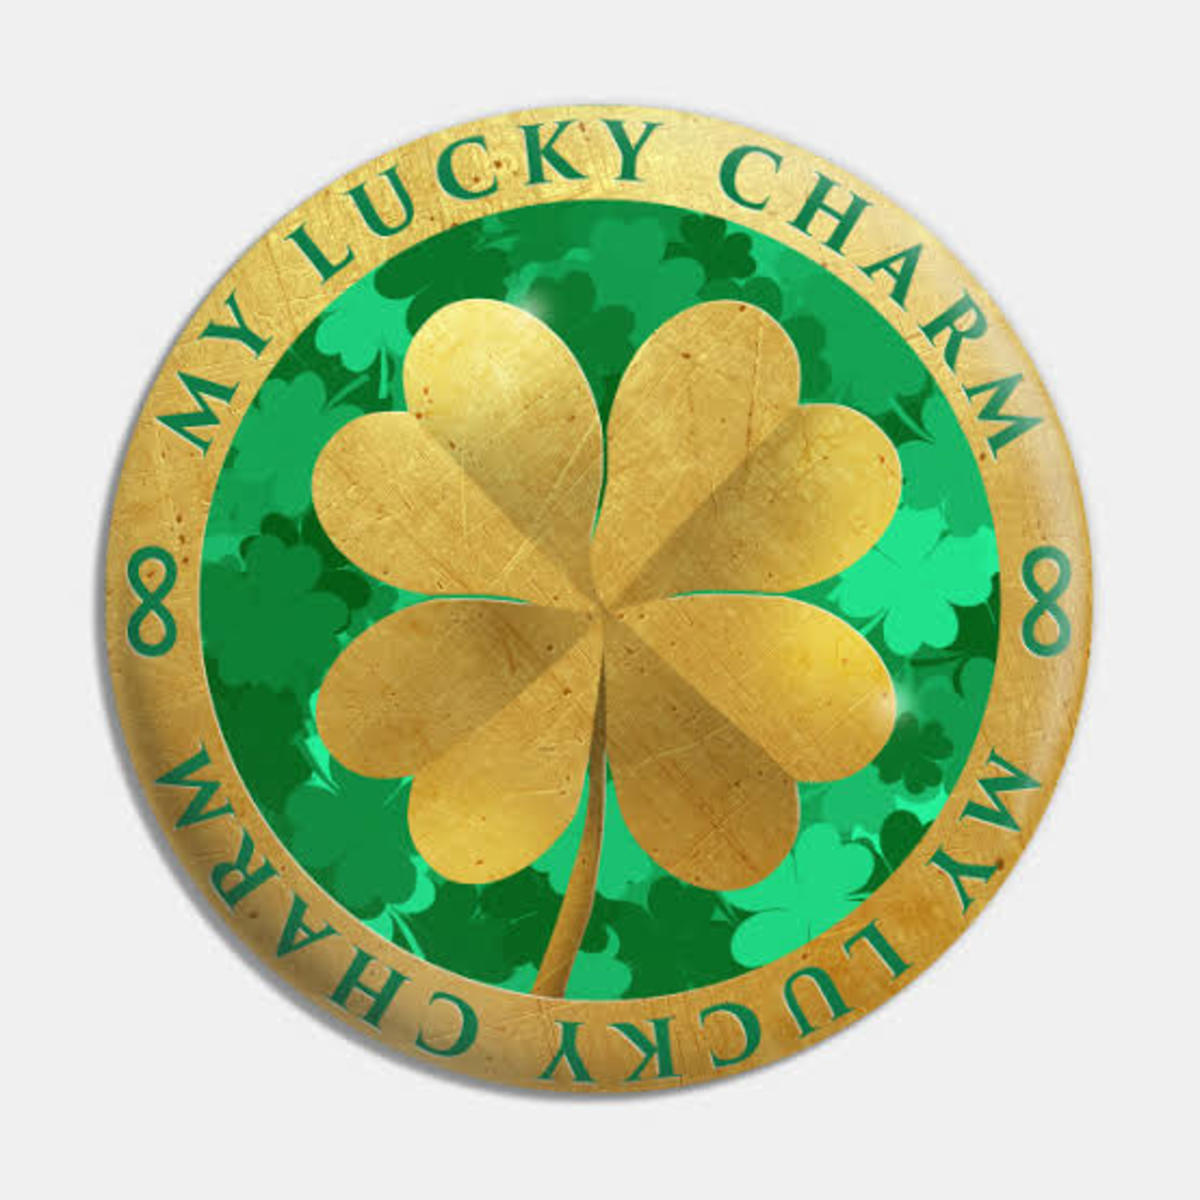 Have a lucky charm